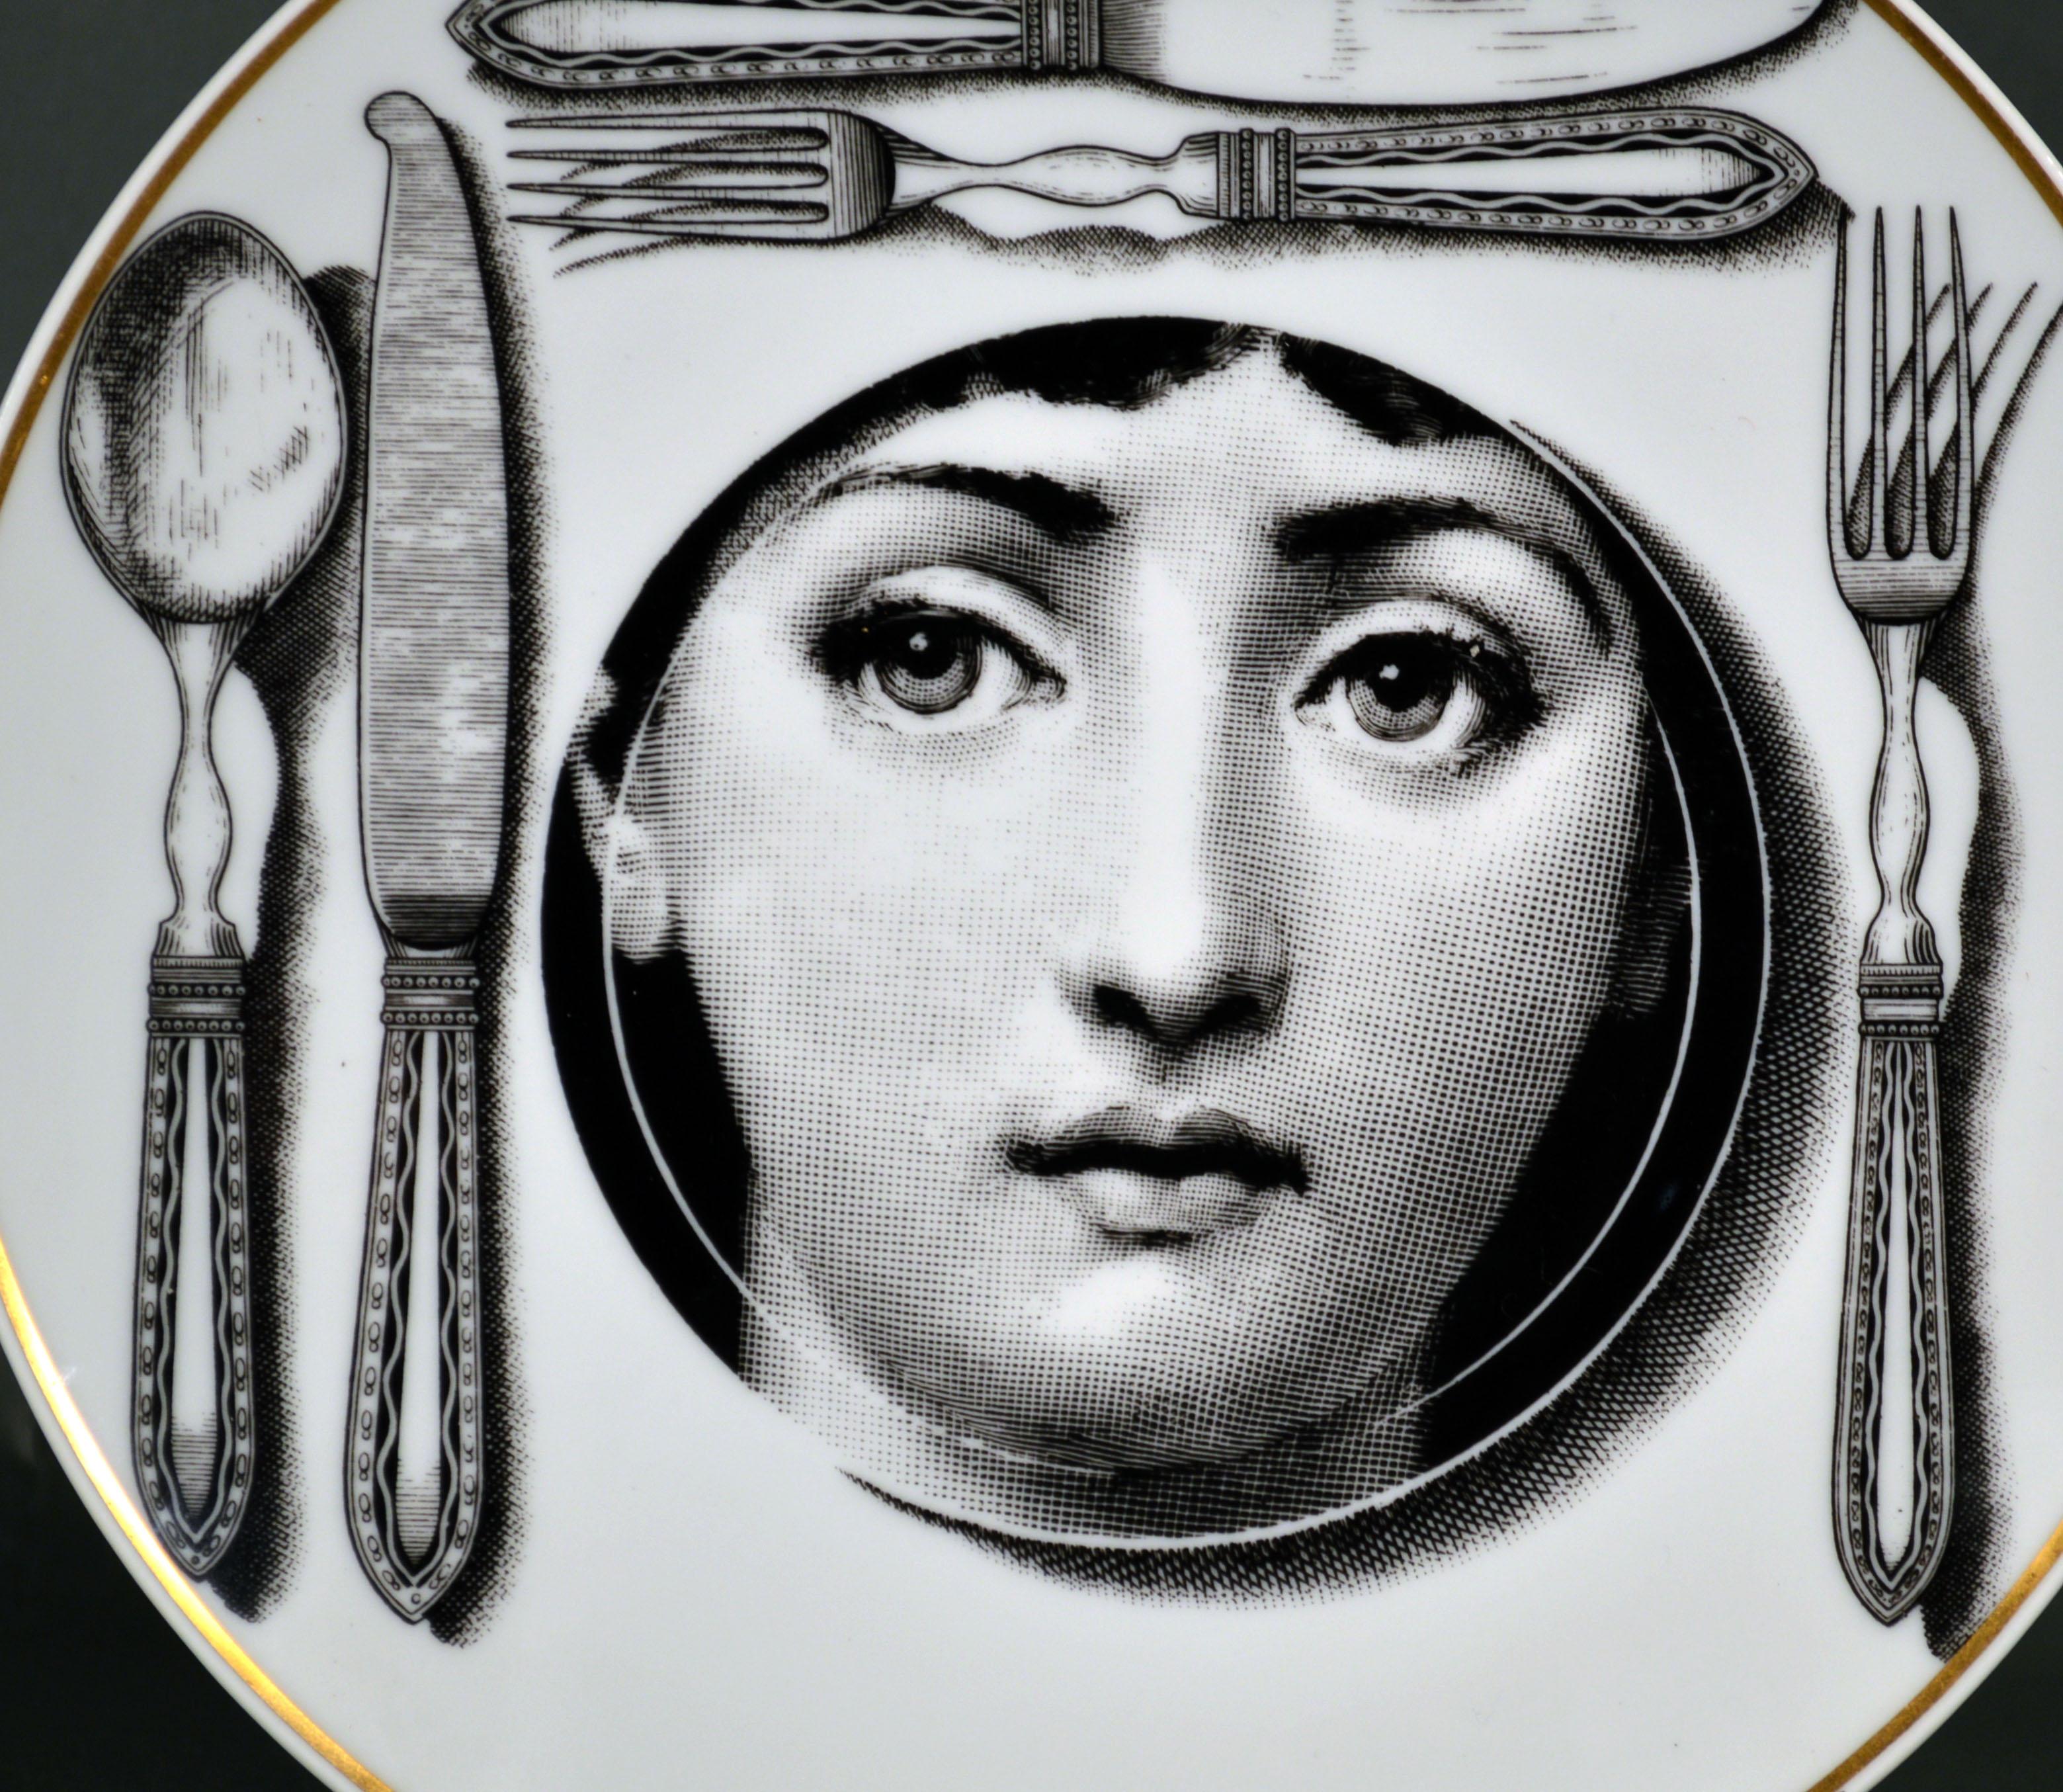 Rosenthal Piero Fornasetti porcelain plate,
Themes & Variation pattern, Motiv 11,
1980s

The striking Rosenthal Fornasetti gold-rimmed black and white printed plate with the face of Lina Cavalieri depicted a dinner plate with knives and forks on